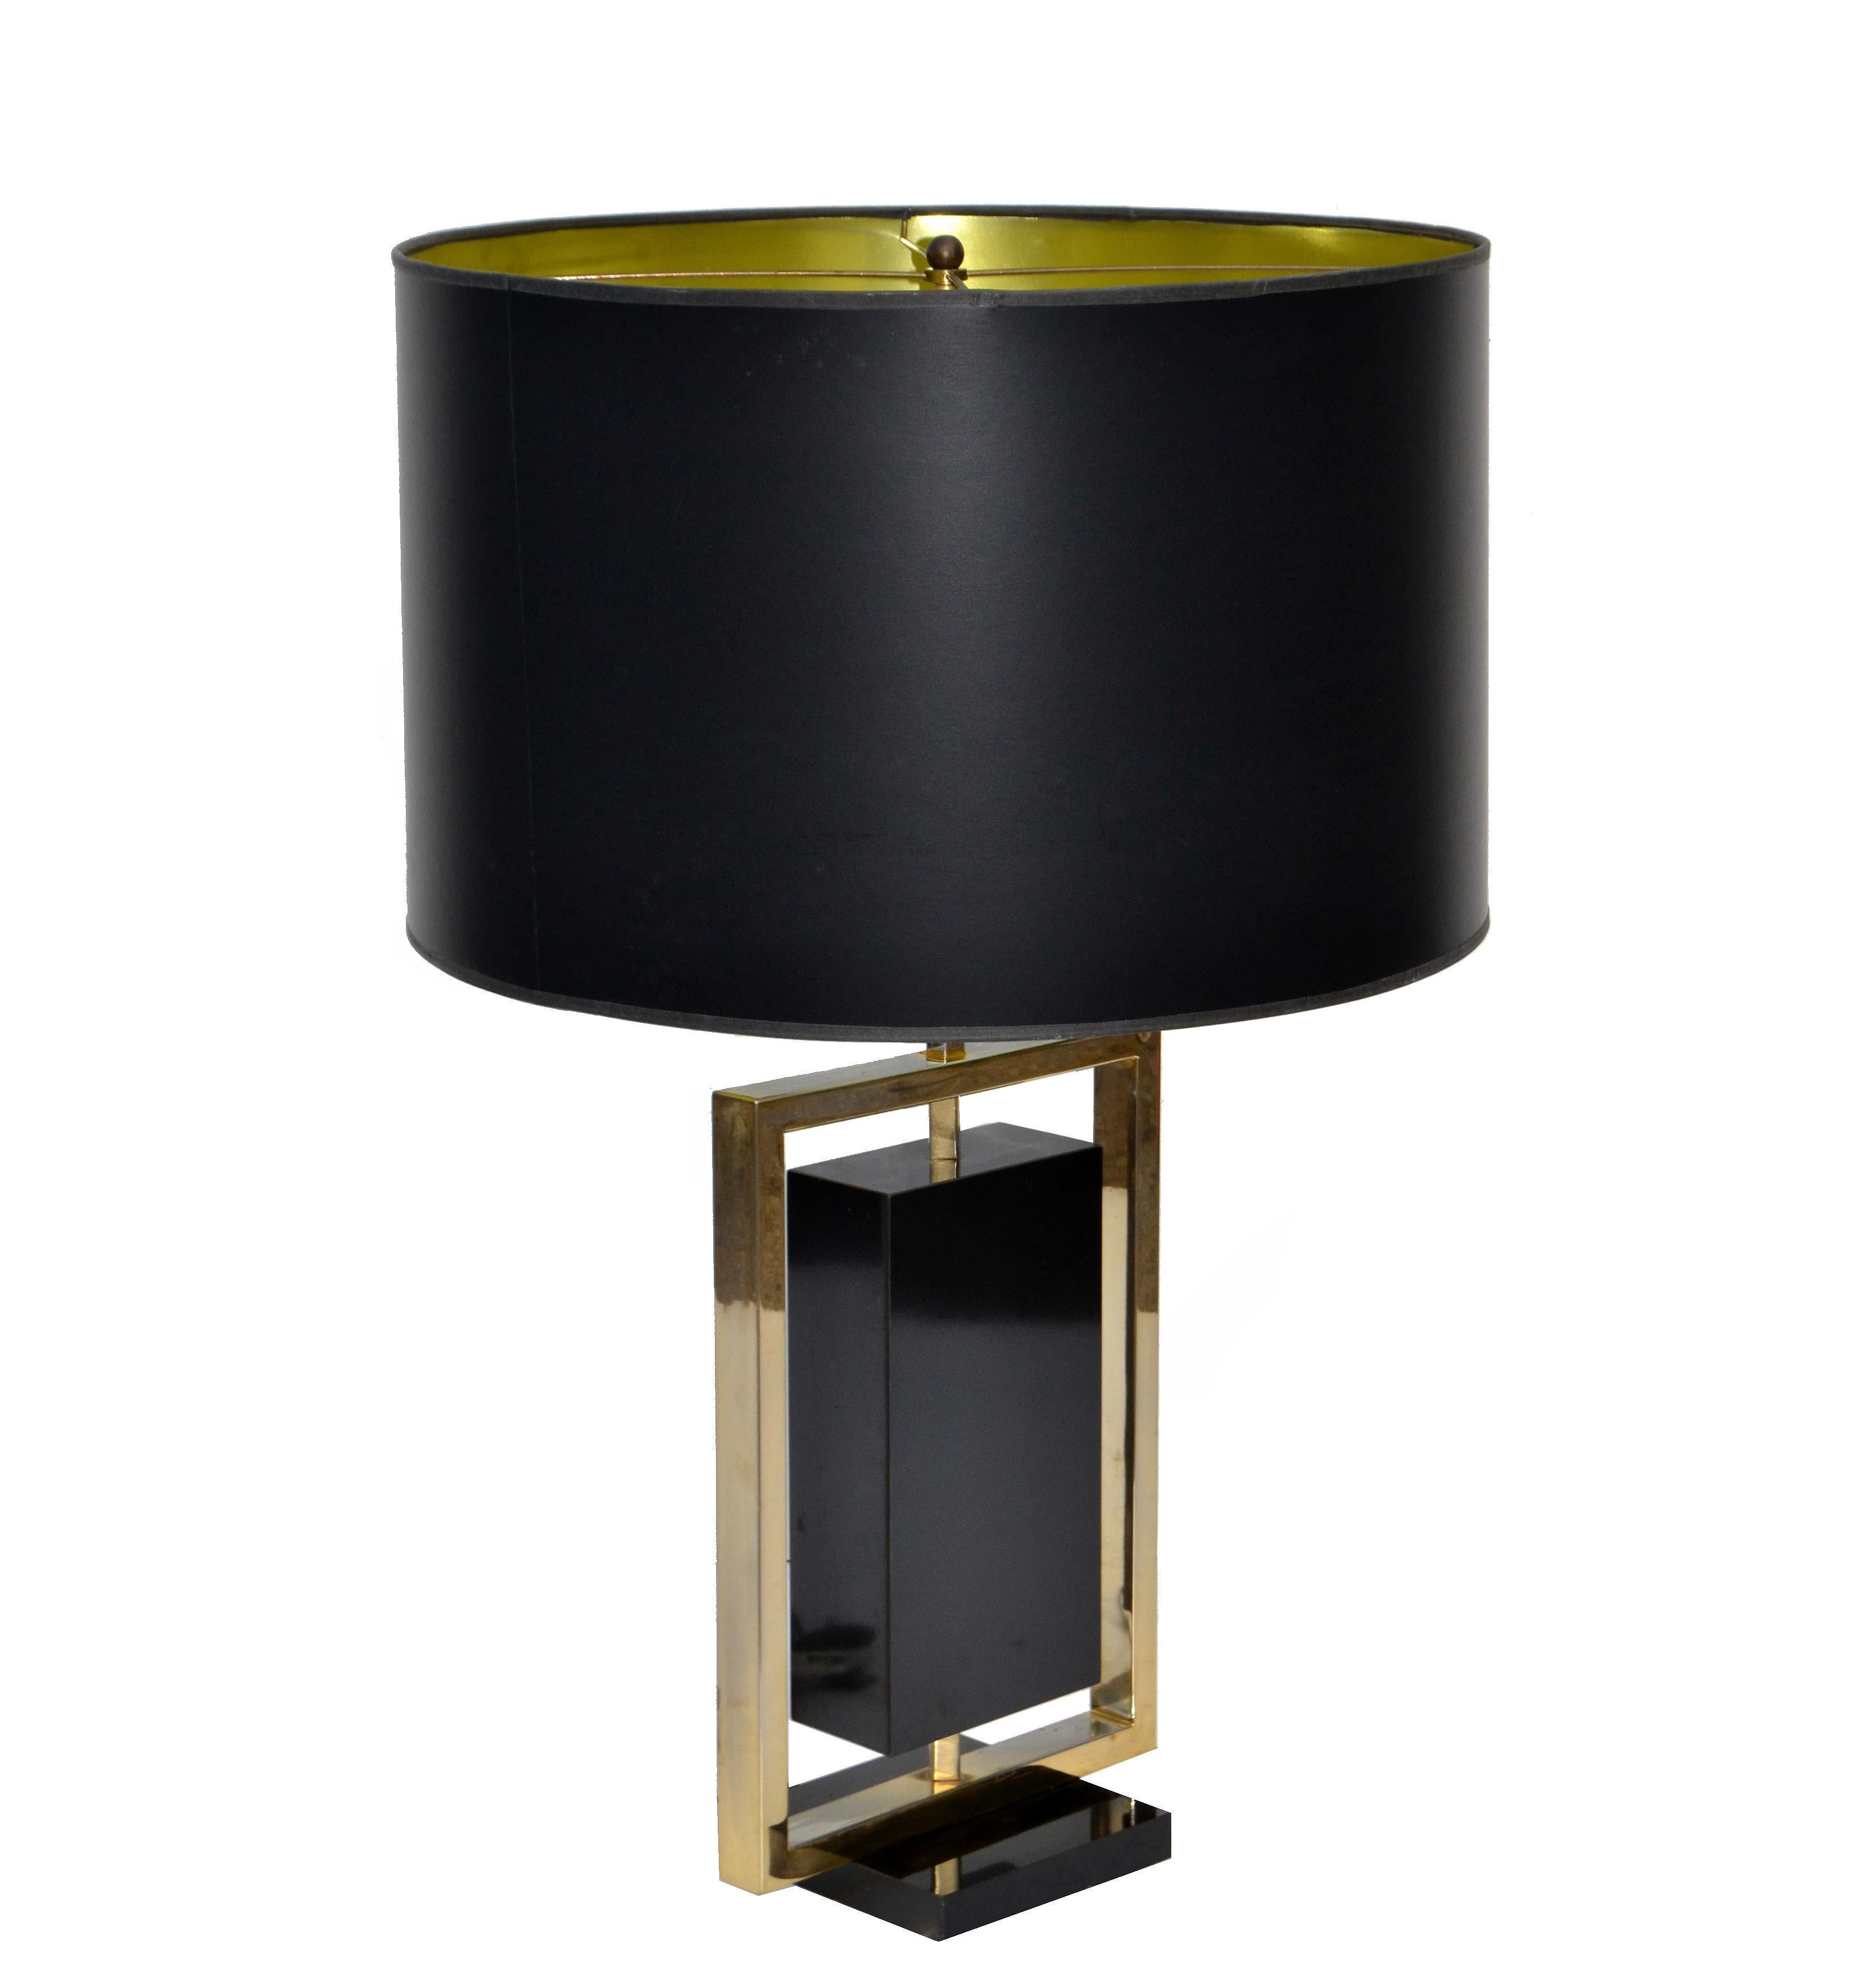 Large and heavy Maison Lancel table lamp, polished, lacquered brass and black marble base.
Decorative black stone in the center which can be turned in different angles.
It is in its original condition, works perfectly and uses 2 max 40 watts light